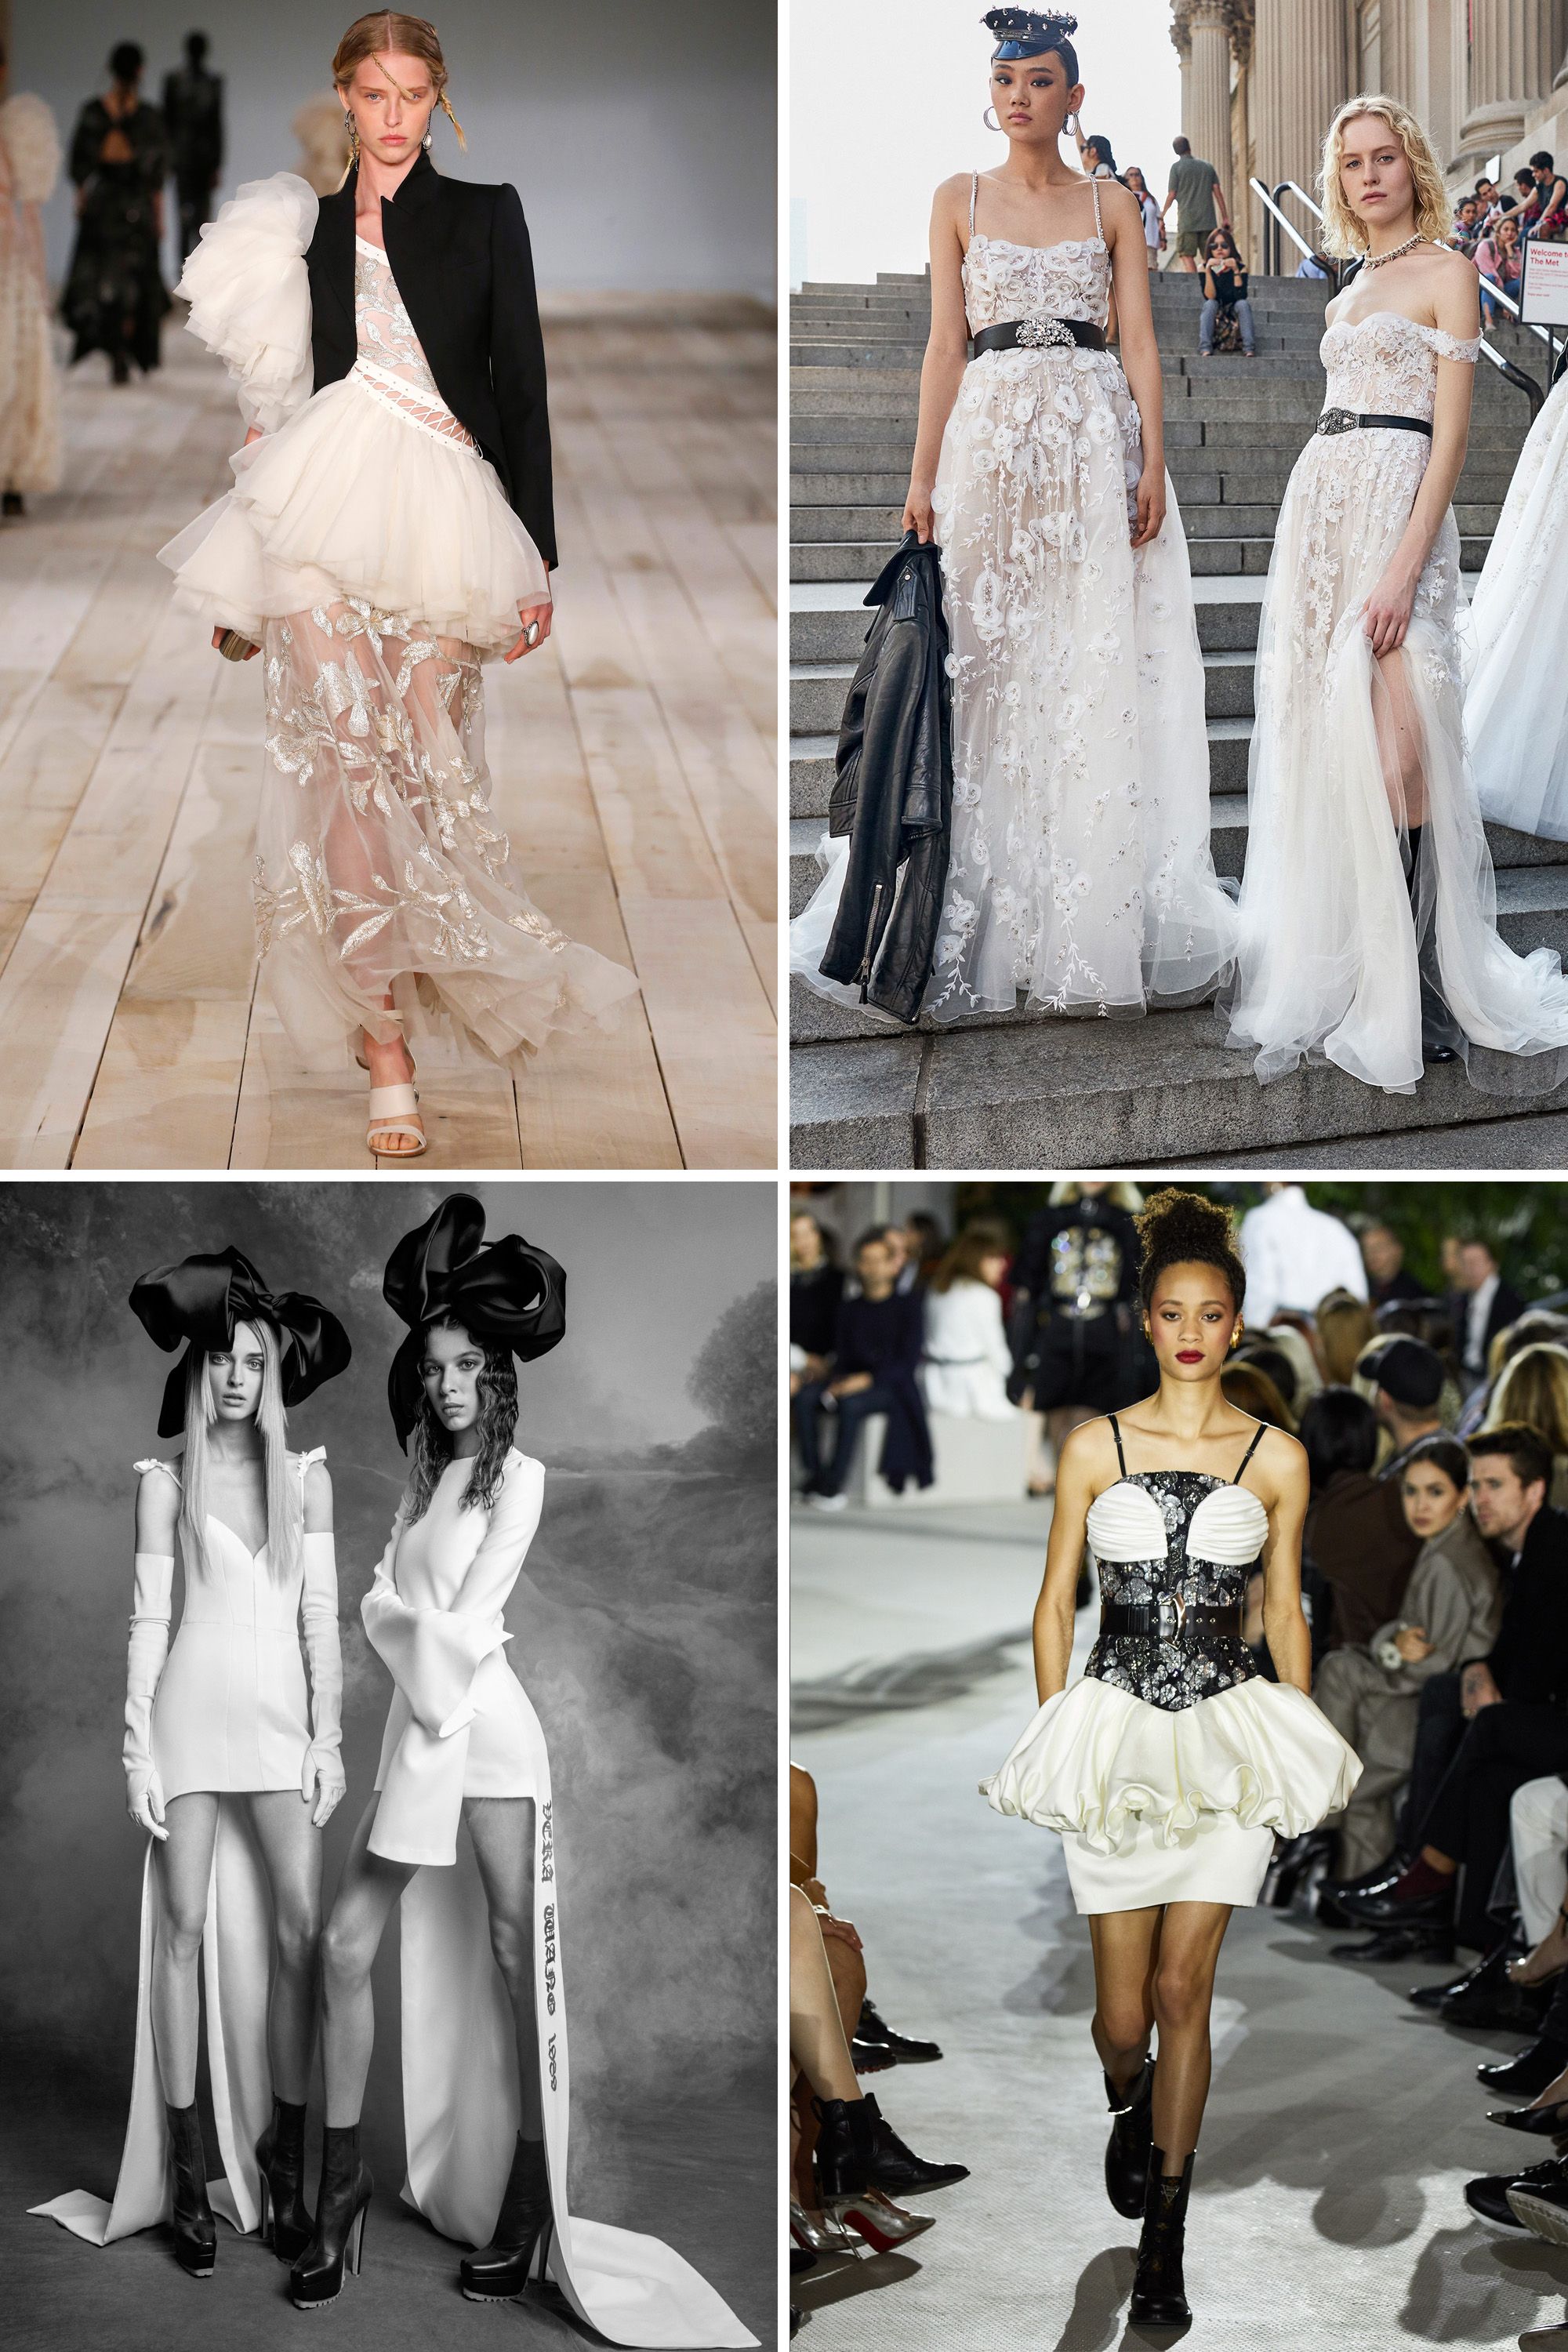 The Most Beautiful Wedding Dresses Brides Wore in 2020